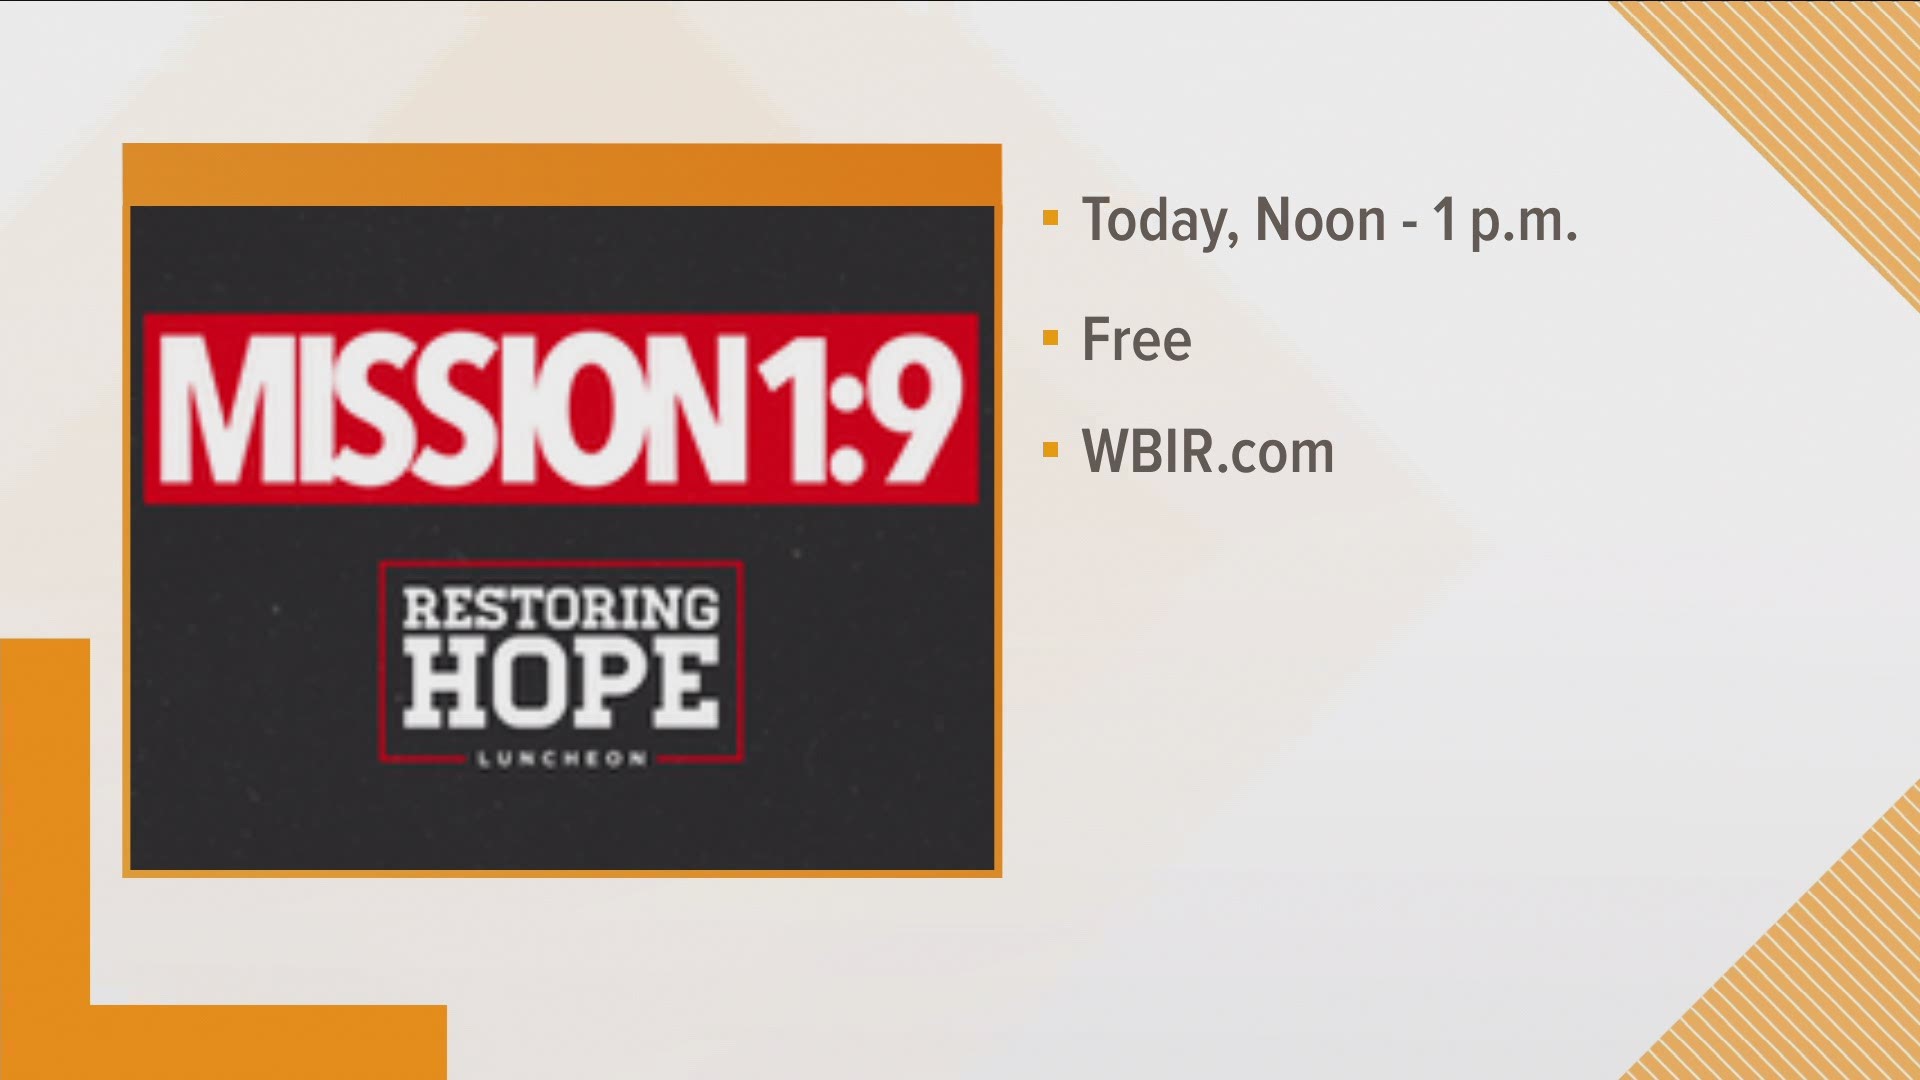 10 News Anchor Abby Ham is emceeing their Restoring Hope Virtual Luncheon on Wednesday from 12:30 p.m. to 1:00 p.m.